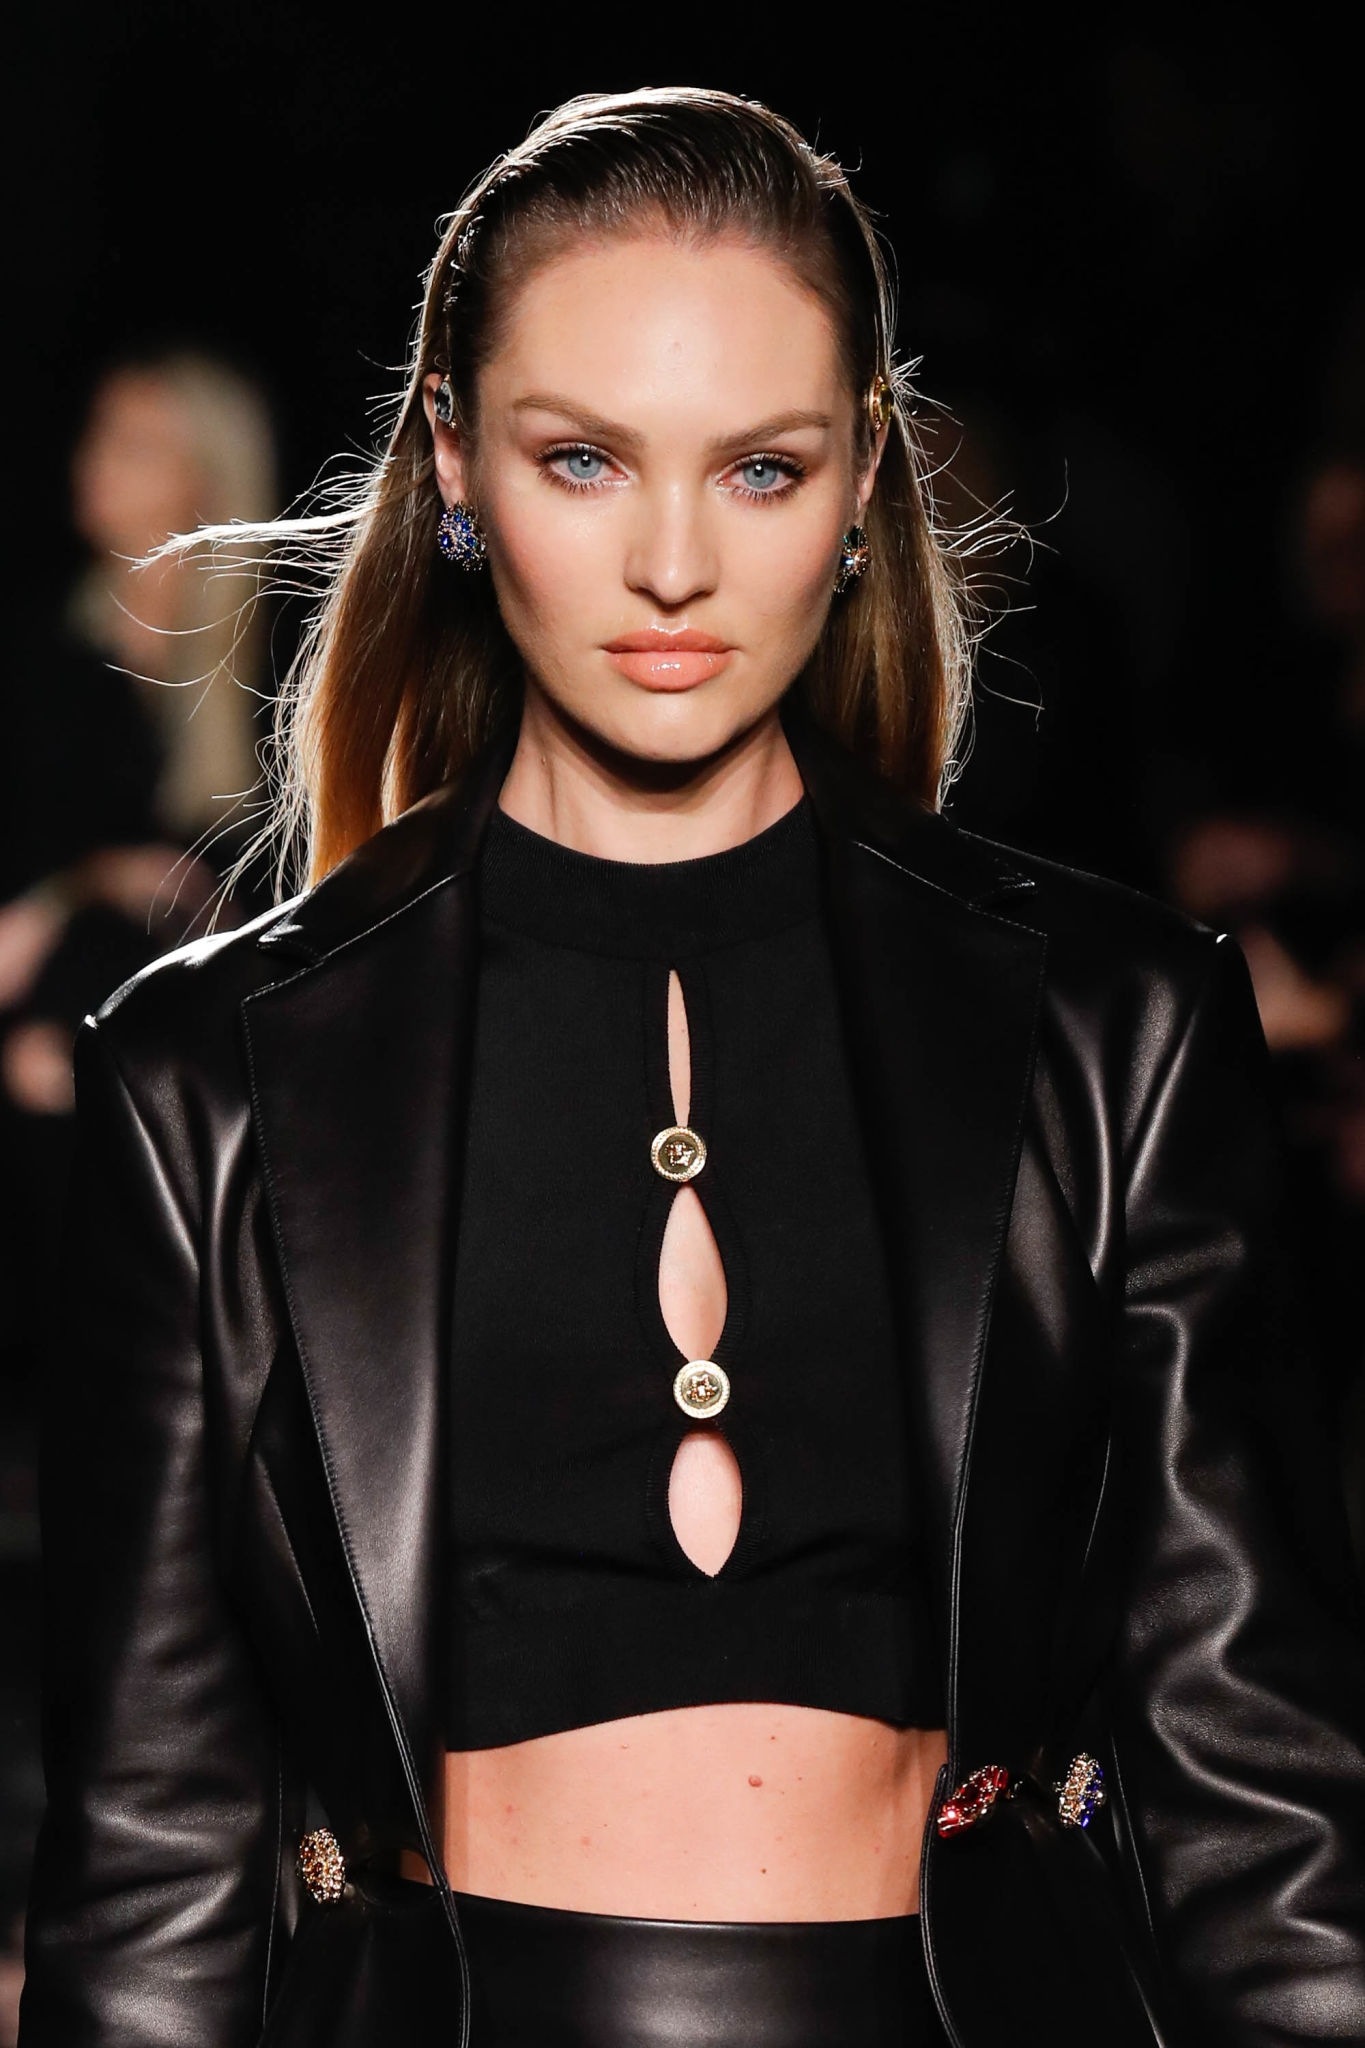 Candice Swanepoel at Versace Pre-Fall 2019 fashion show